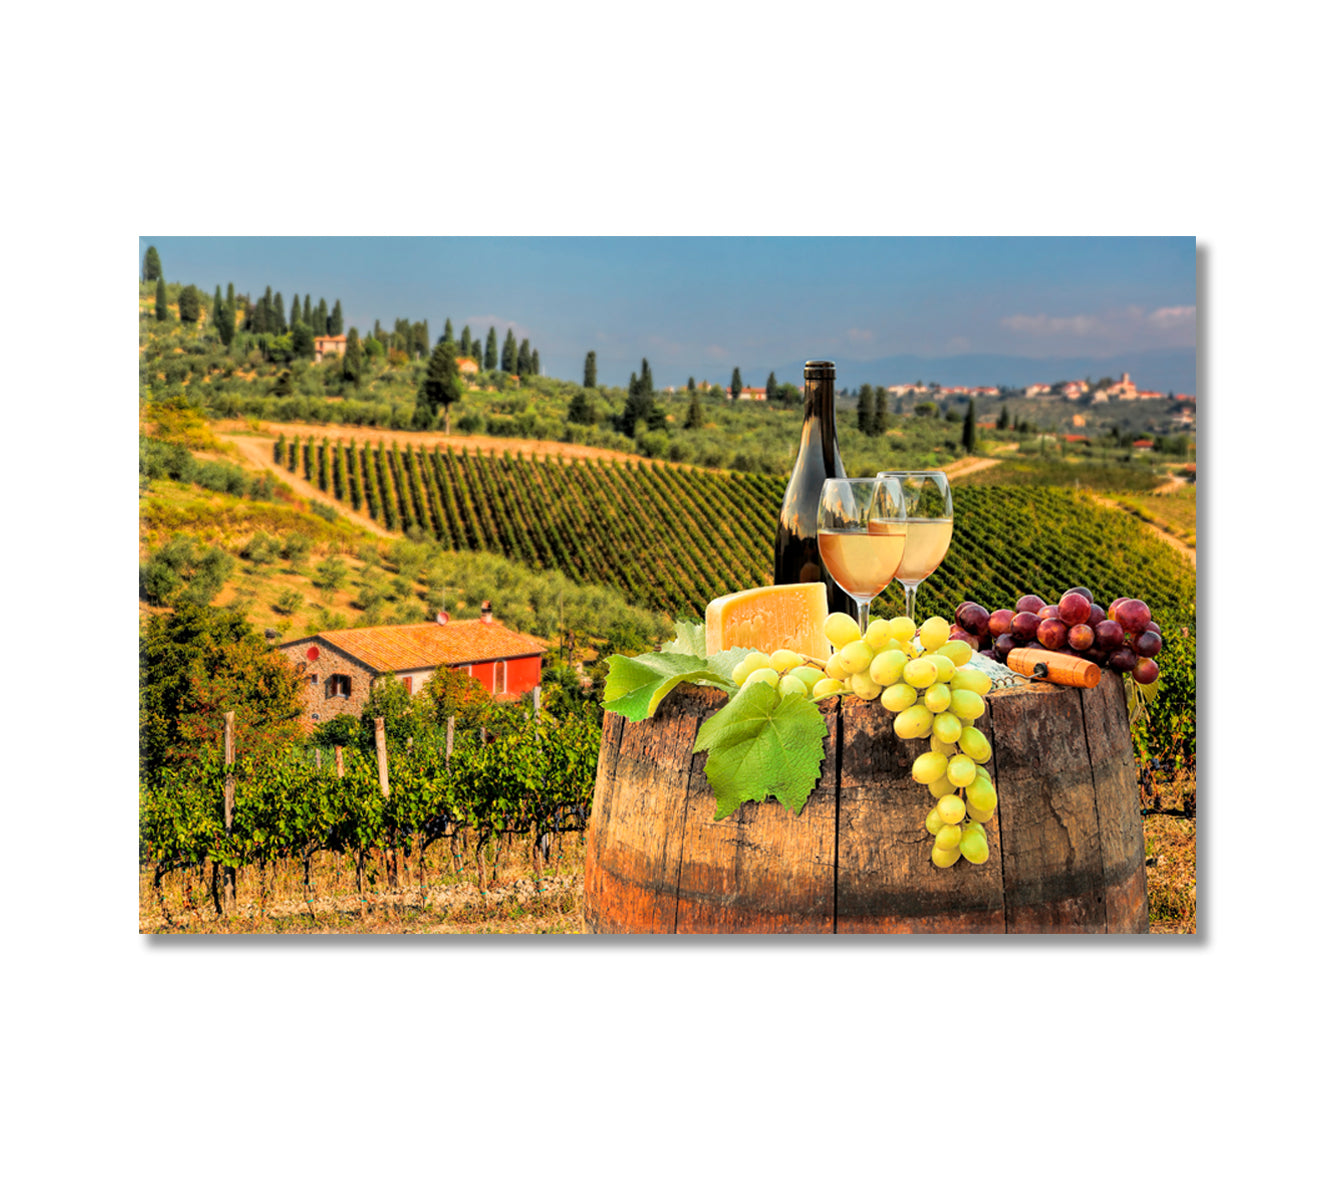 Wine with Barrel on Vineyard in Chianti Tuscany Italy Canvas Print-Canvas Print-CetArt-1 Panel-24x16 inches-CetArt